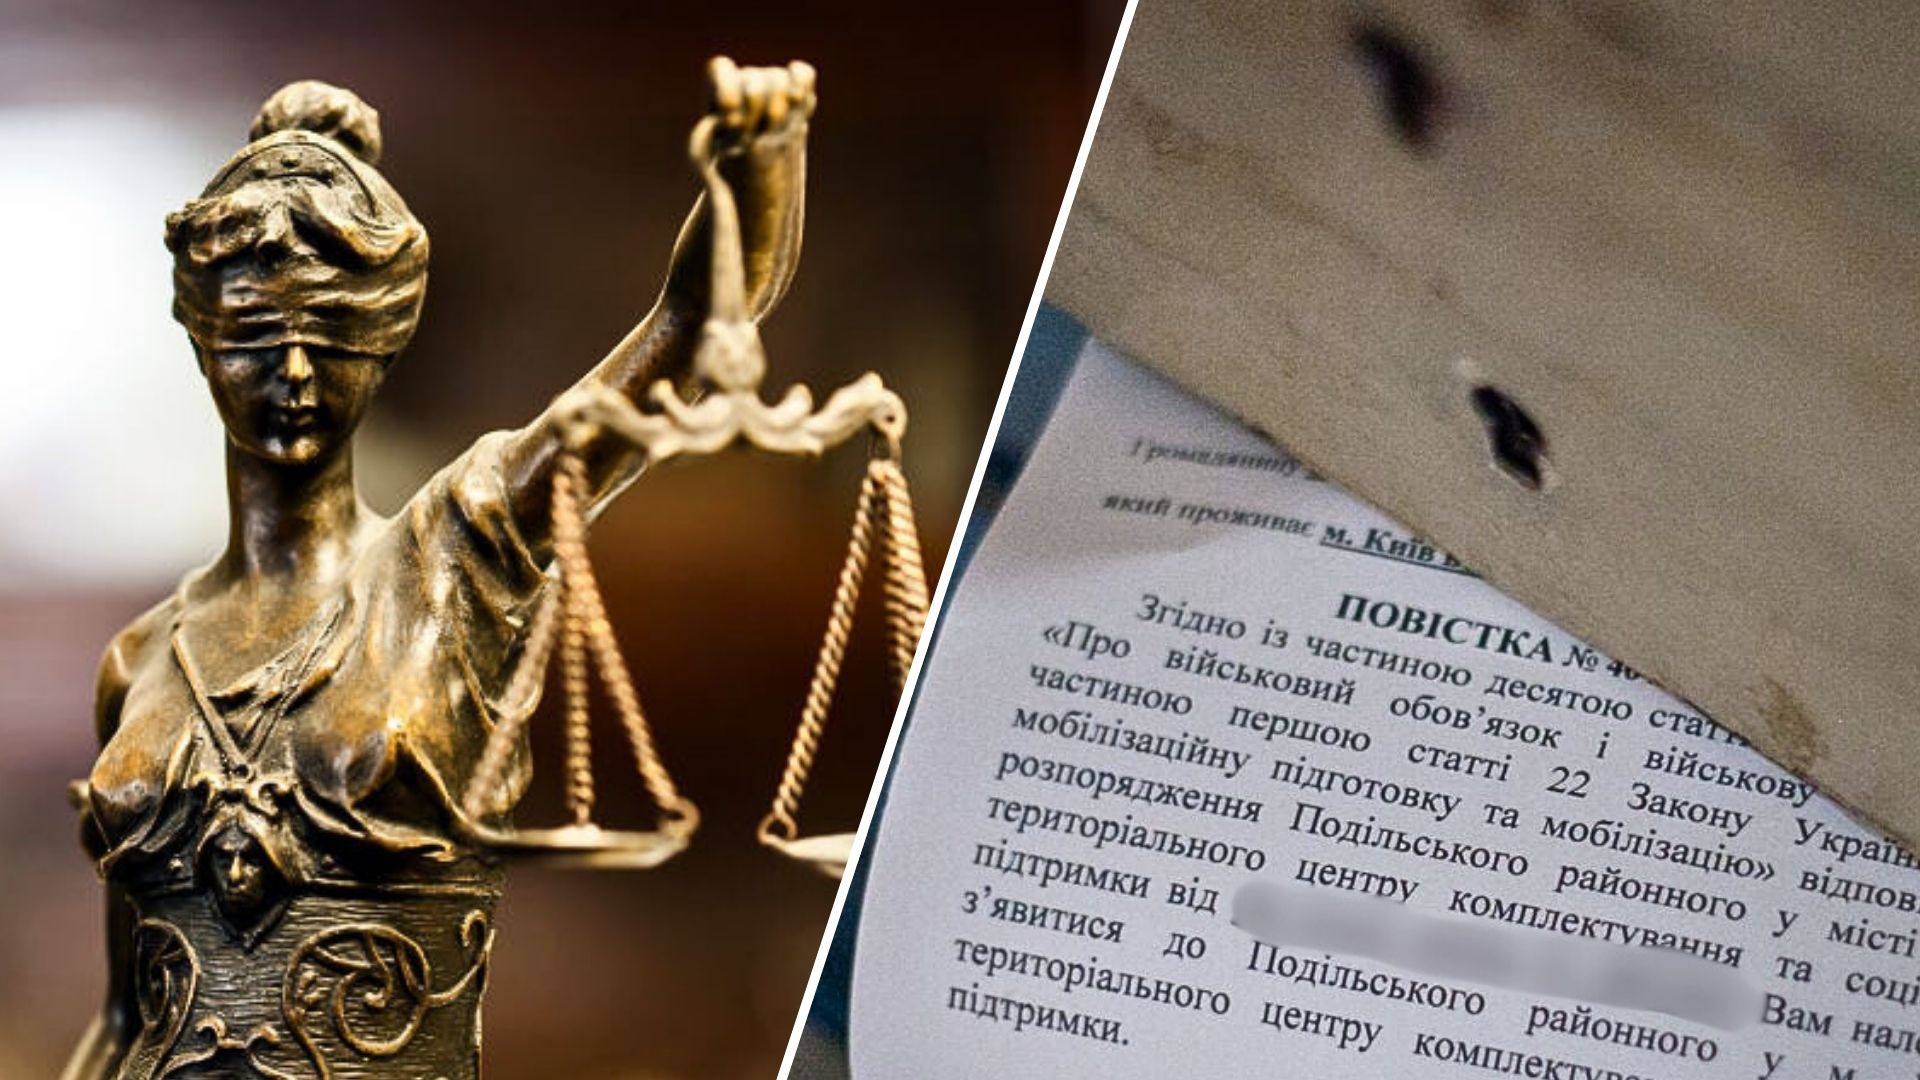 In the Lviv region, a man who categorically refused mobilization was sentenced to 3 years of probation.